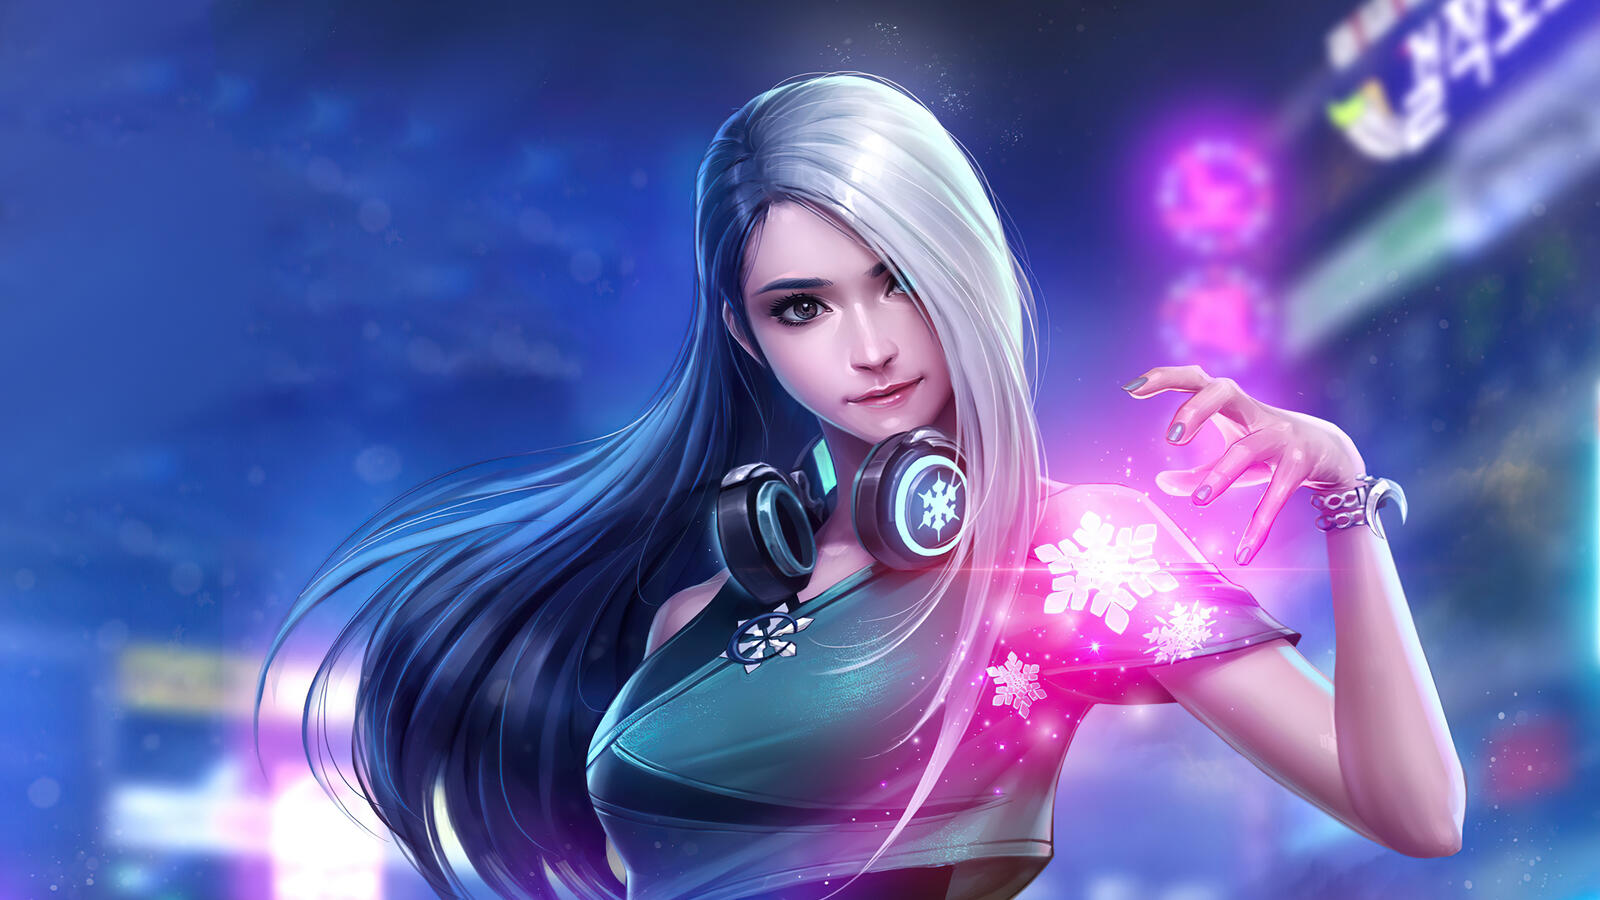 Wallpapers Marvel Future Fight games girl on the desktop